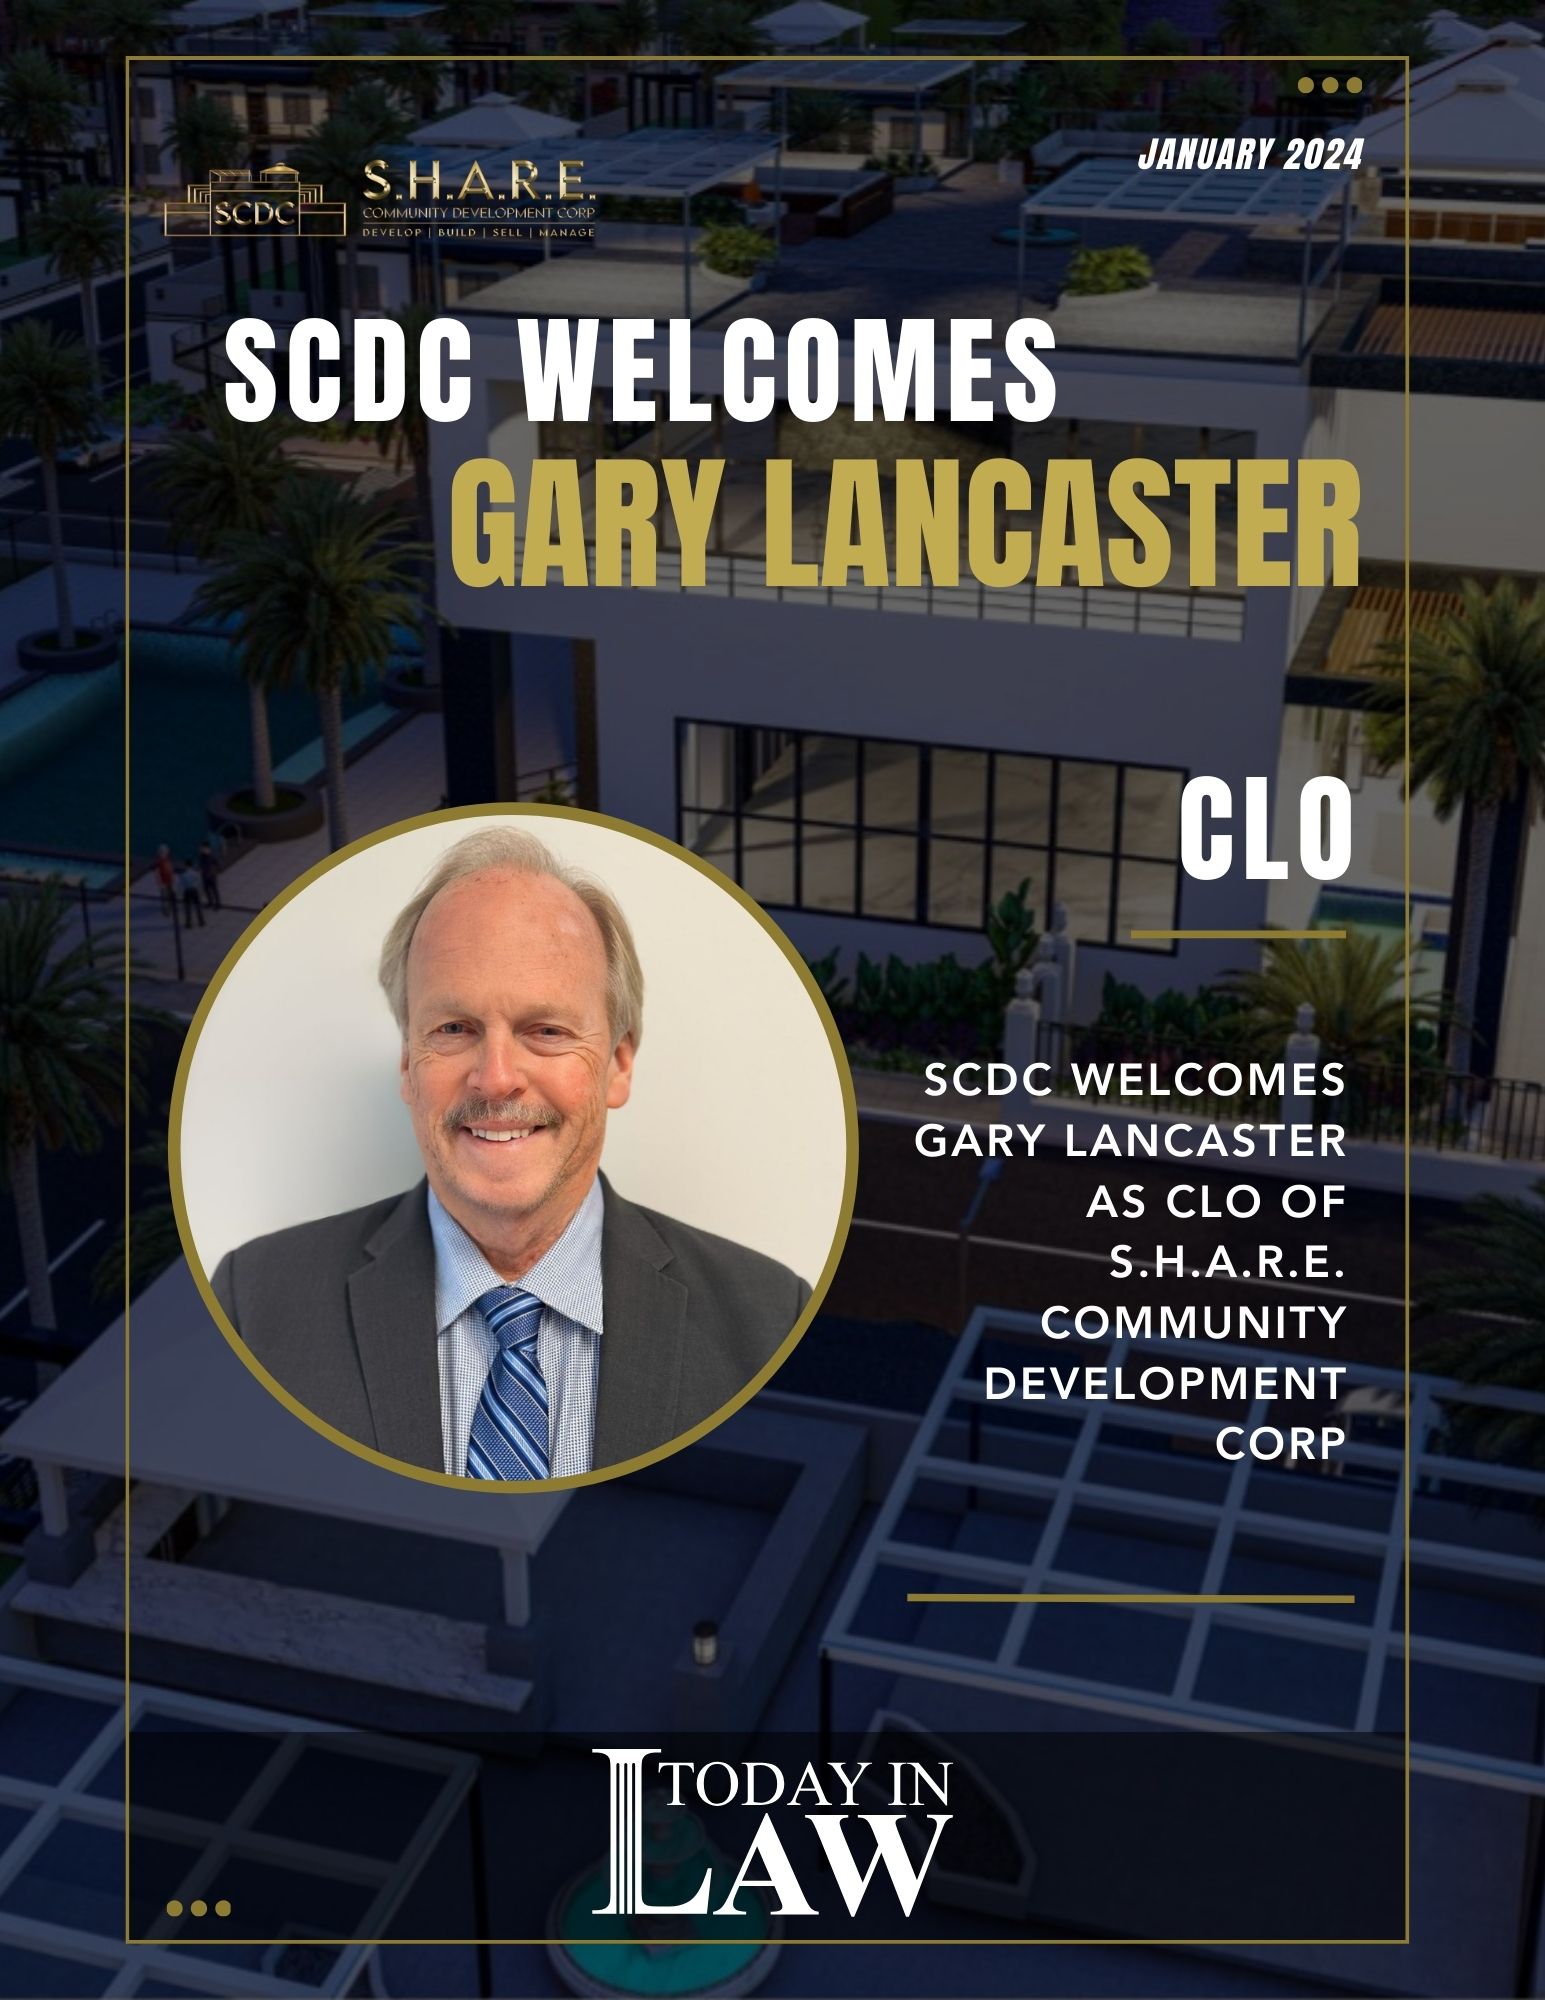 S.H.A.R.E. Community Development Corp Welcomes Gary Lancaster as Chief Legal Officer